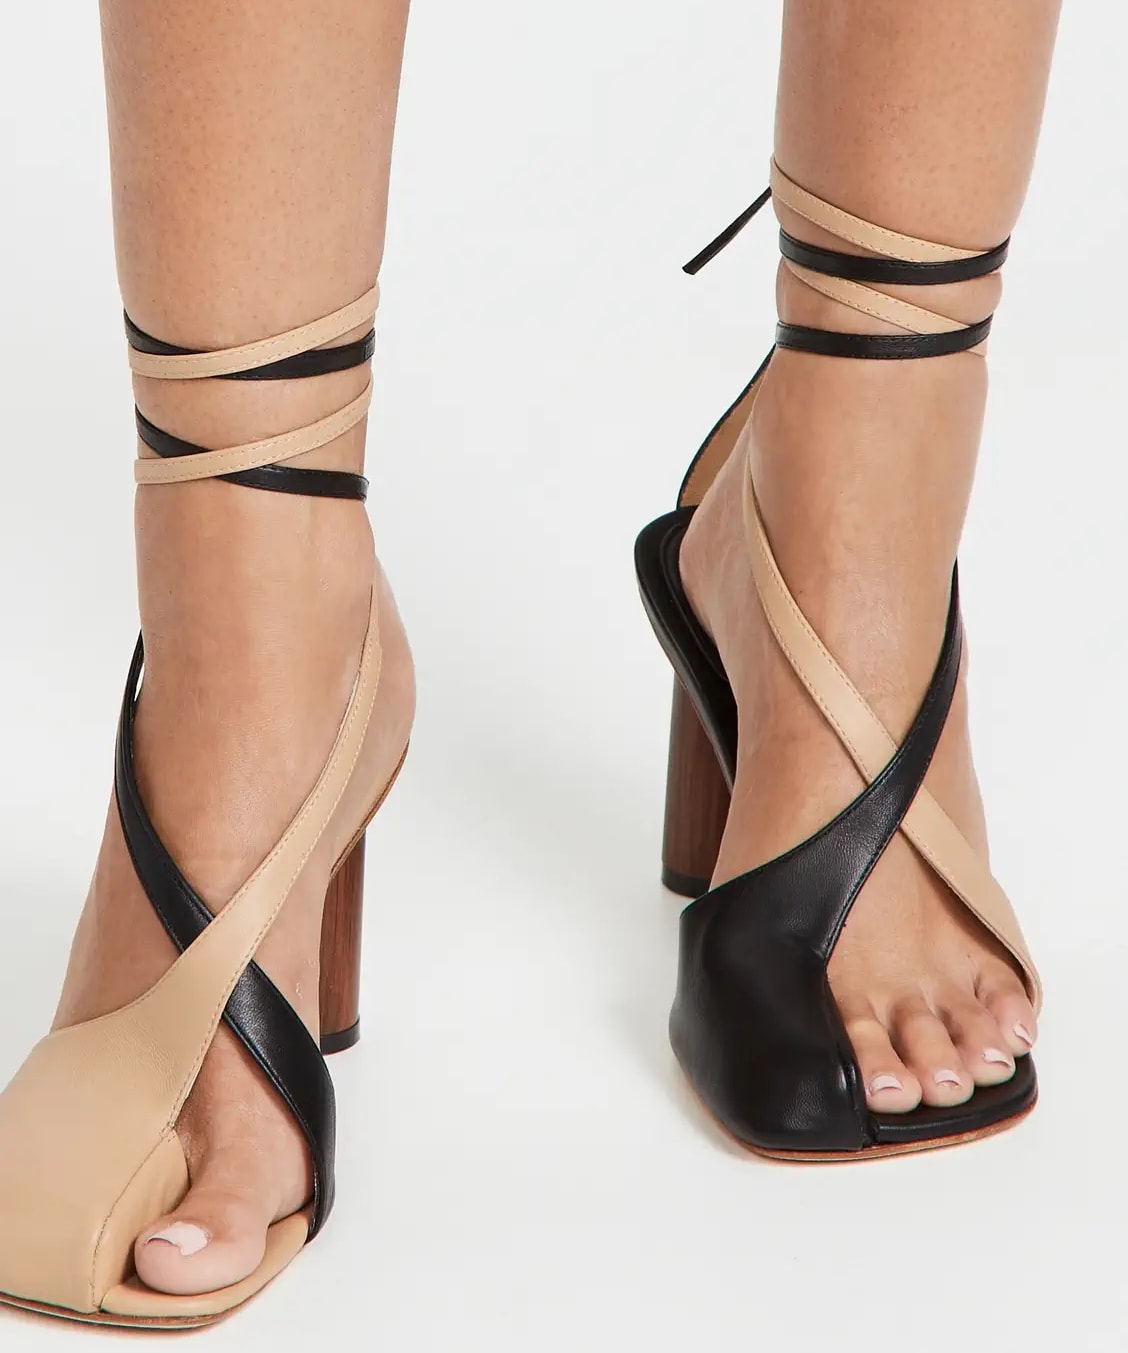 Beige and black asymmetrical open-toe A.W.A.K.E MODE Geraldine wood heel sandals with wraparound ankle tie closure